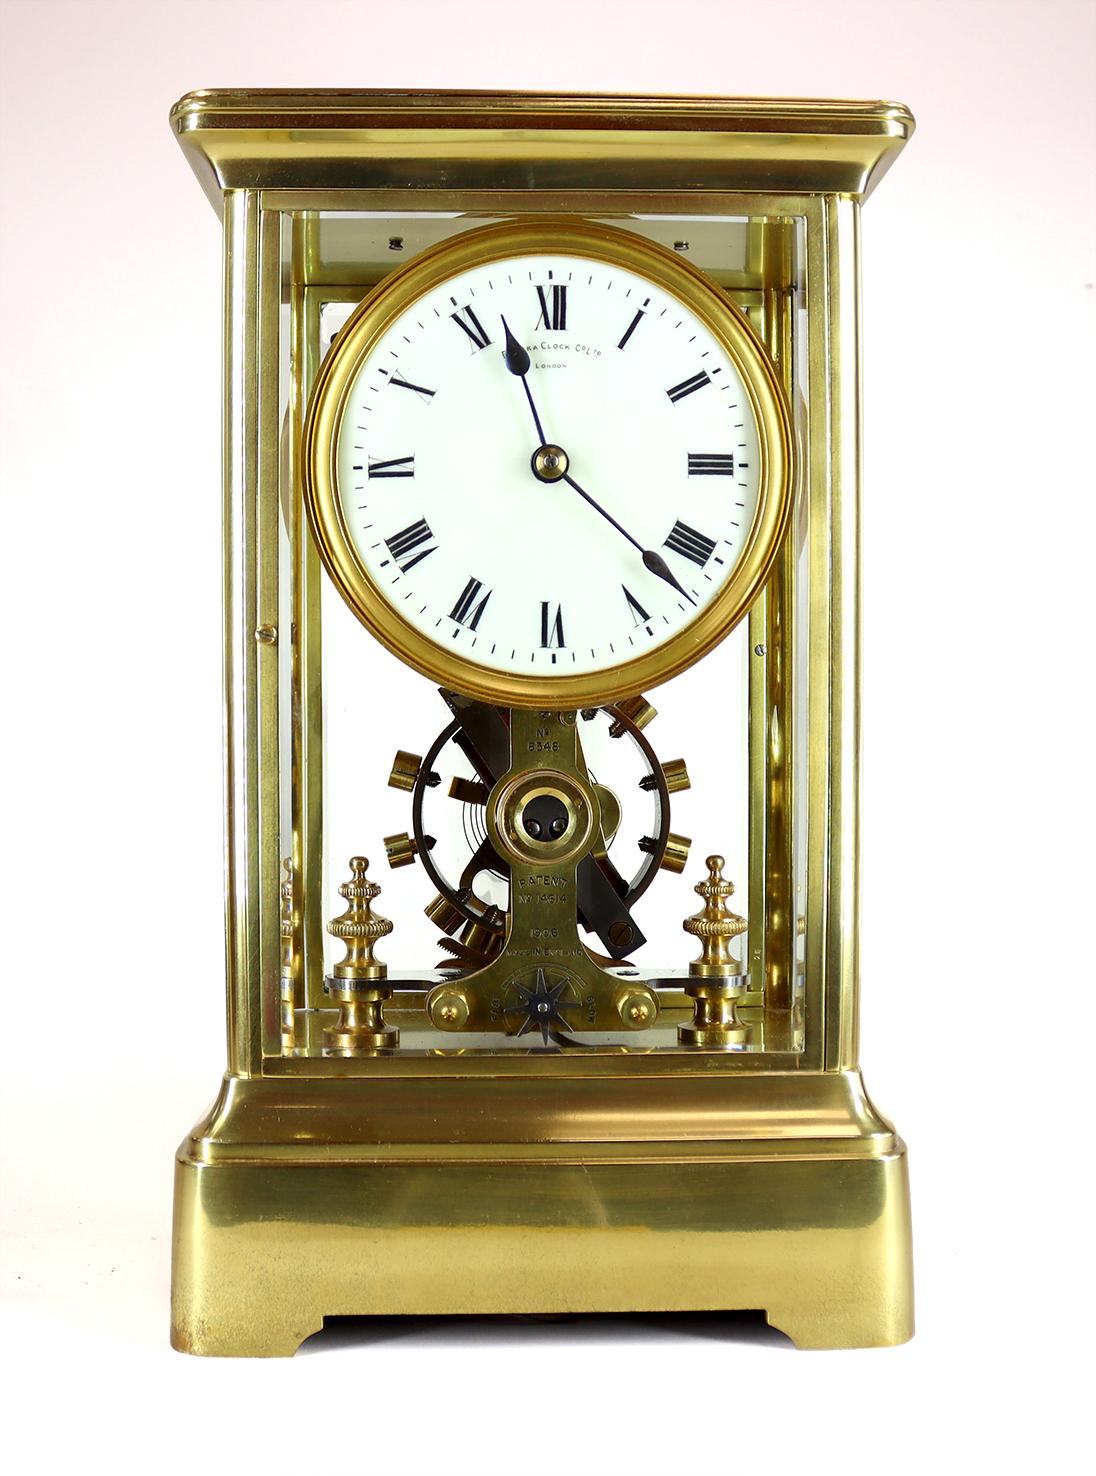 A superb example of a Eureka Clock made c1912.

The electromagnetic movement is regulated by a large, slowly oscillating bi-metallic balance wheel, with the correct battery these clock will run for the duration of the battery life. Housed in a brass